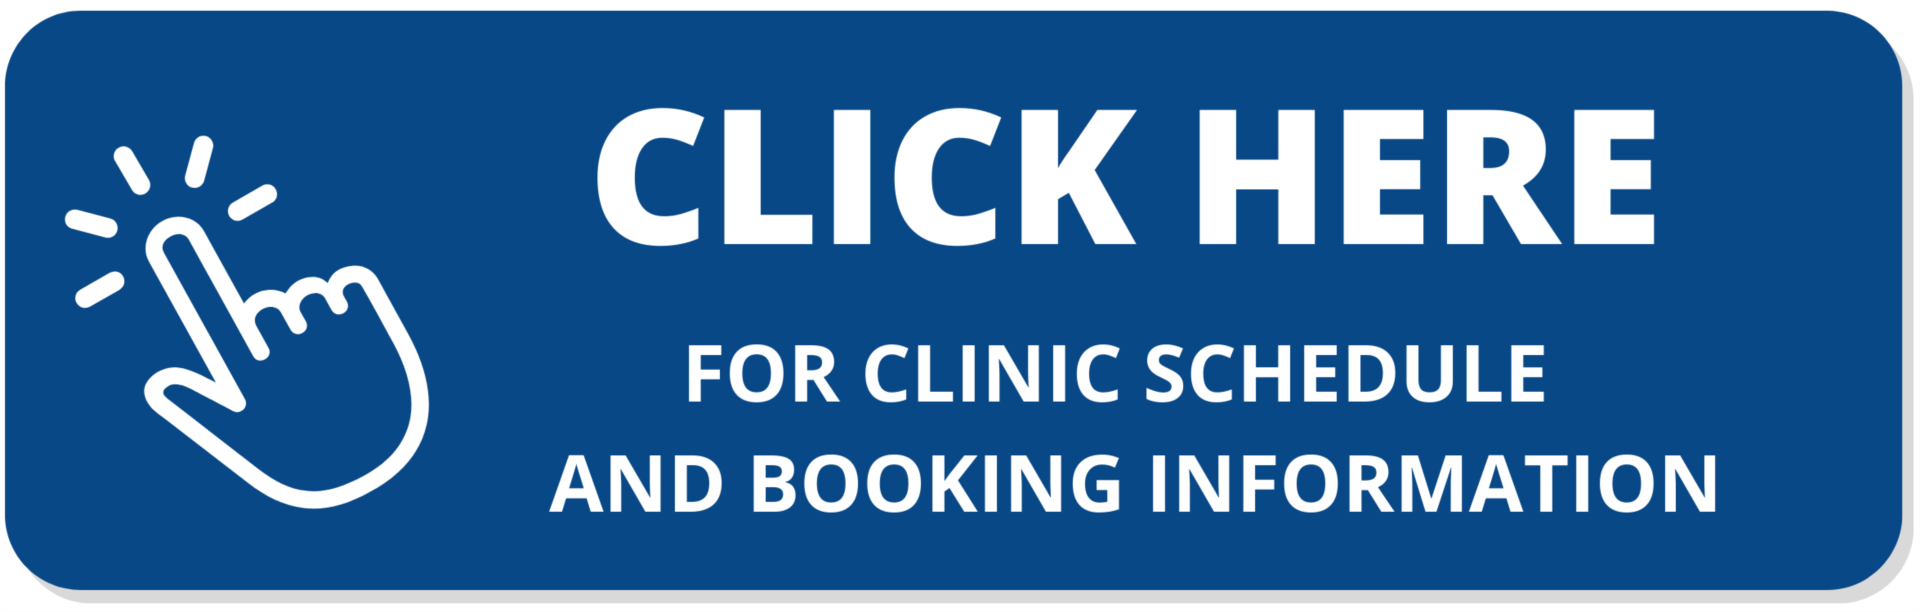 Click here for clinic schedule and booking information